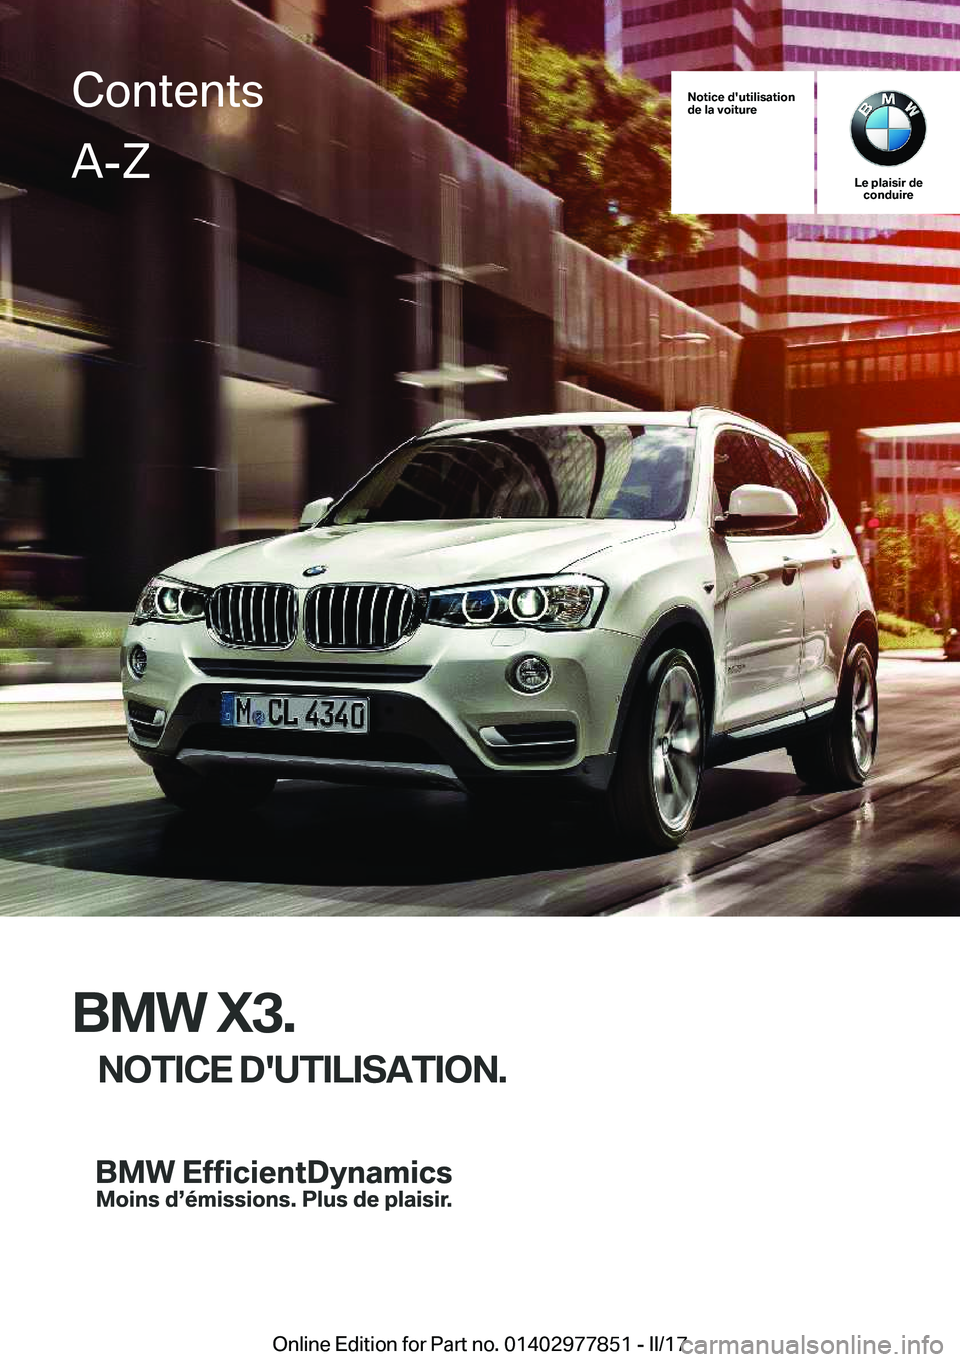 BMW X3 2017  Notices Demploi (in French) �N�o�t�i�c�e��d�'�u�t�i�l�i�s�a�t�i�o�n
�d�e��l�a��v�o�i�t�u�r�e
�L�e��p�l�a�i�s�i�r��d�e �c�o�n�d�u�i�r�e
�B�M�W��X�3�.
�N�O�T�I�C�E��D�'�U�T�I�L�I�S�A�T�I�O�N�.
�C�o�n�t�e�n�t�s�A�-�Z